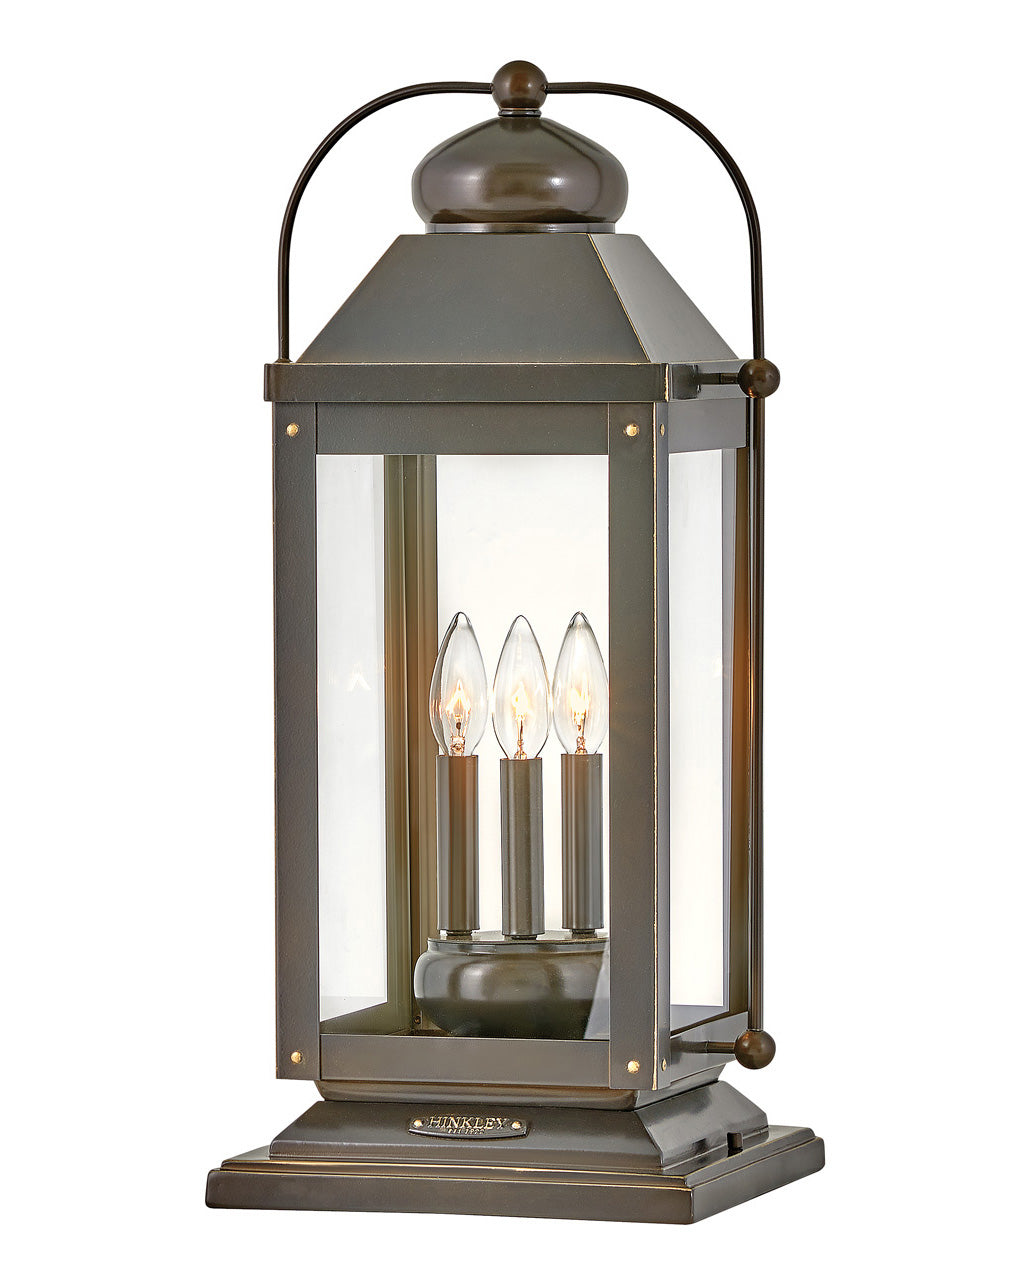 OUTDOOR ANCHORAGE Pier Mount Lantern Outdoor l Wall Hinkley Light Oiled Bronze 11.0x11.0x23.5 